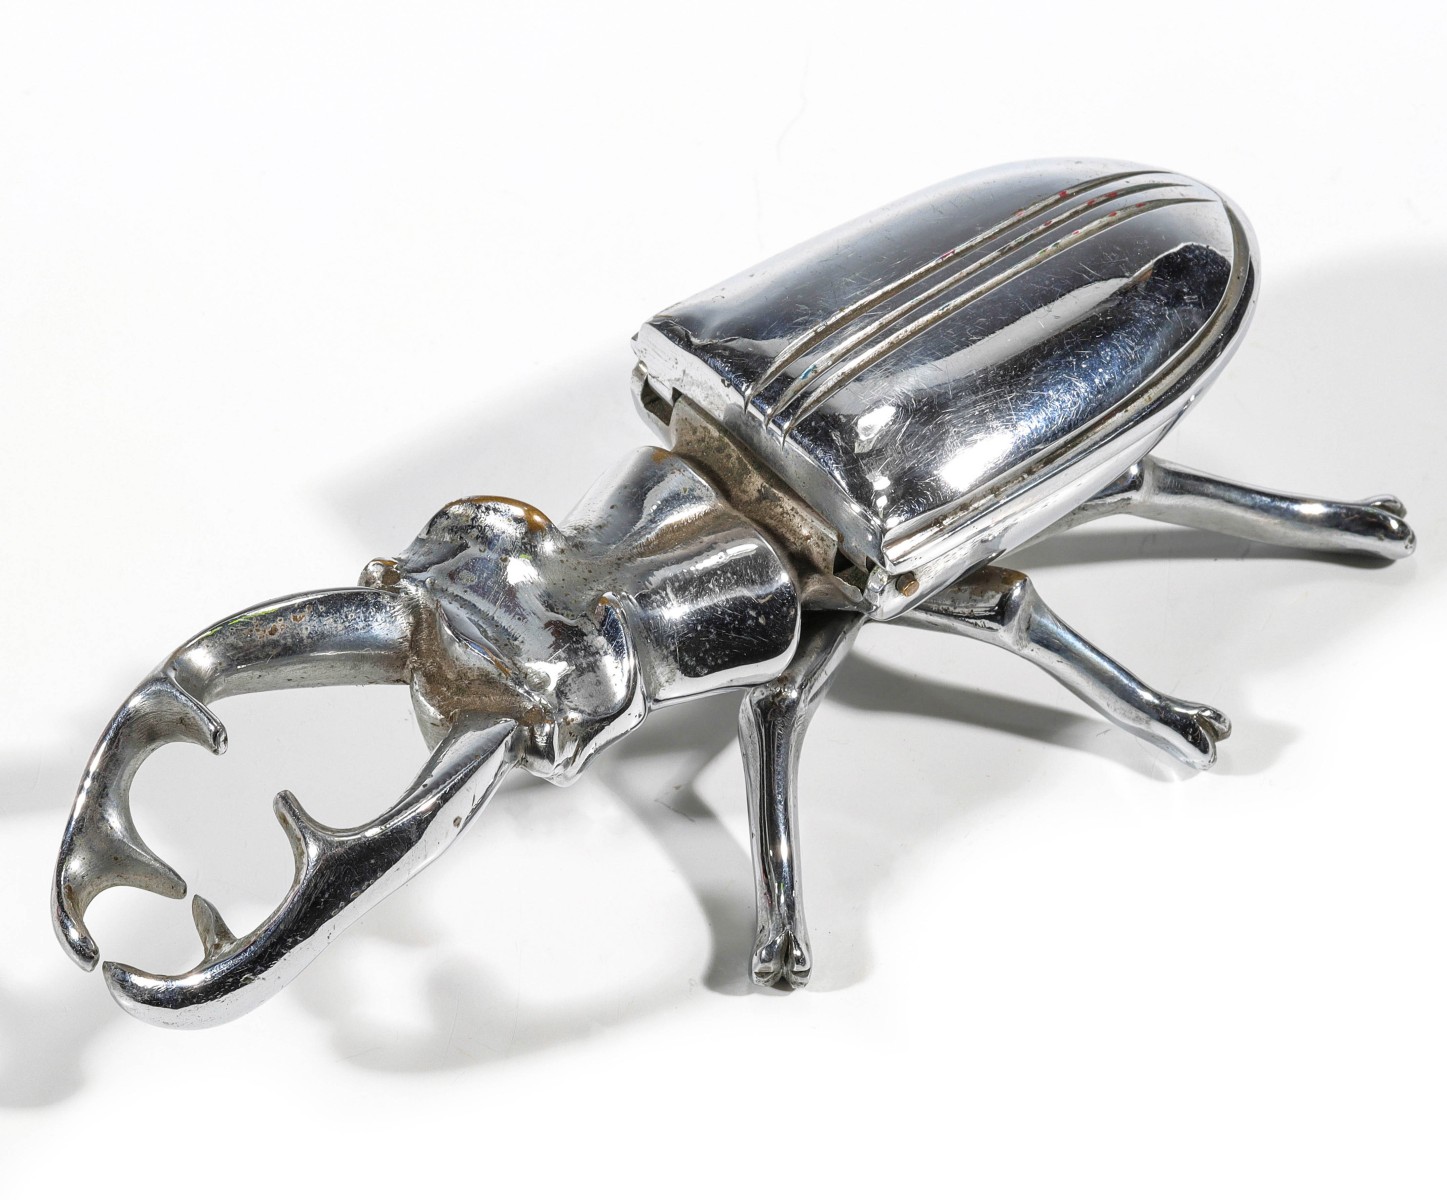 NICKEL PLATED BRASS STAG BEETLE MATCH SAFE C. 1910